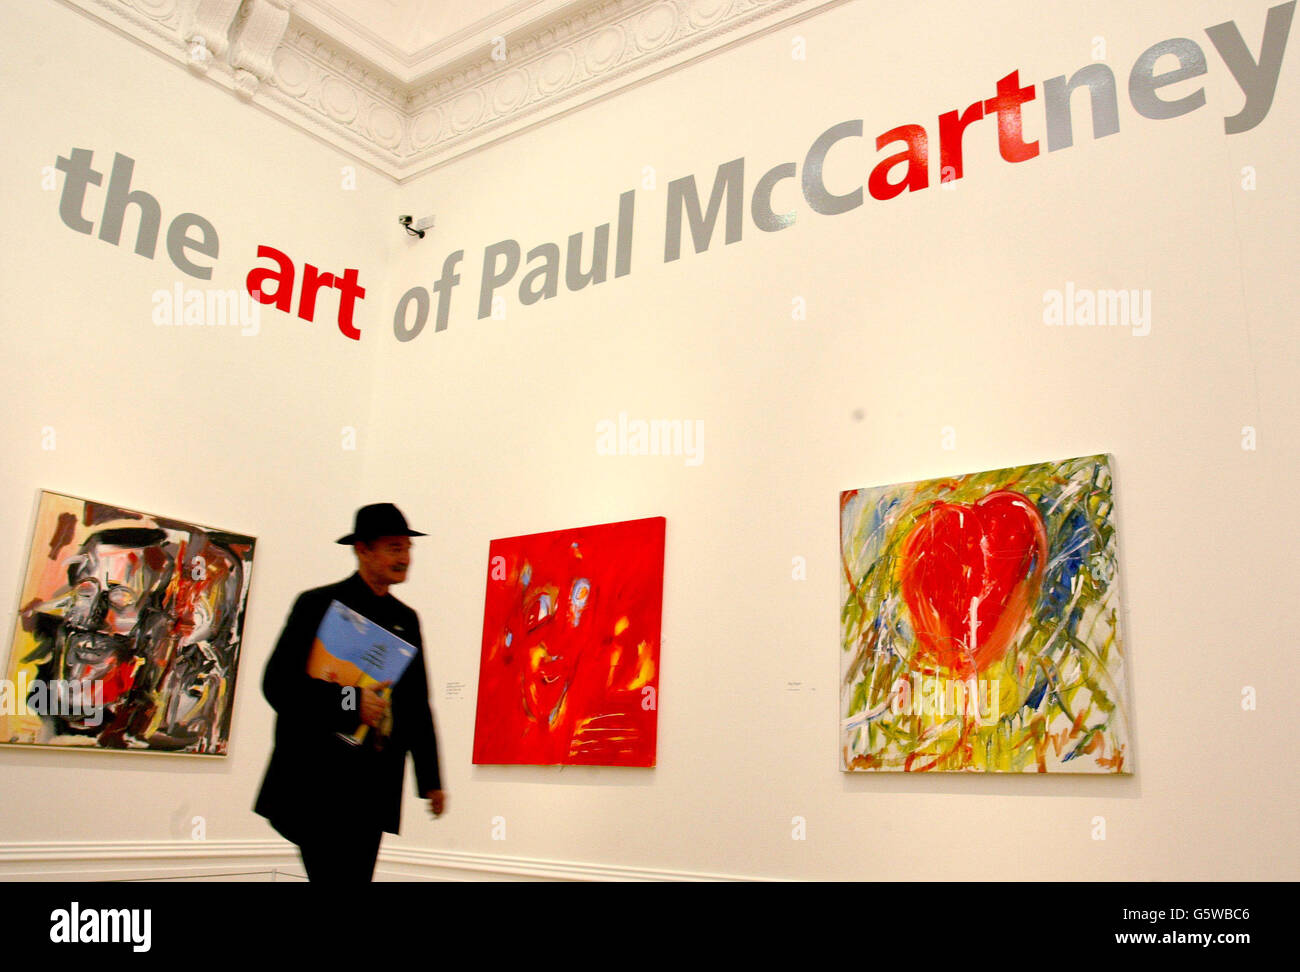 An art critic makes his way through the works of Sir Paul McCartney, which he has dedicated to his wife-to-be Heather Mills, which go on display along with other examples of his work at Liverpool's Walker Art gallery in an exhibition called 'the art of Paul McCartney. Stock Photo